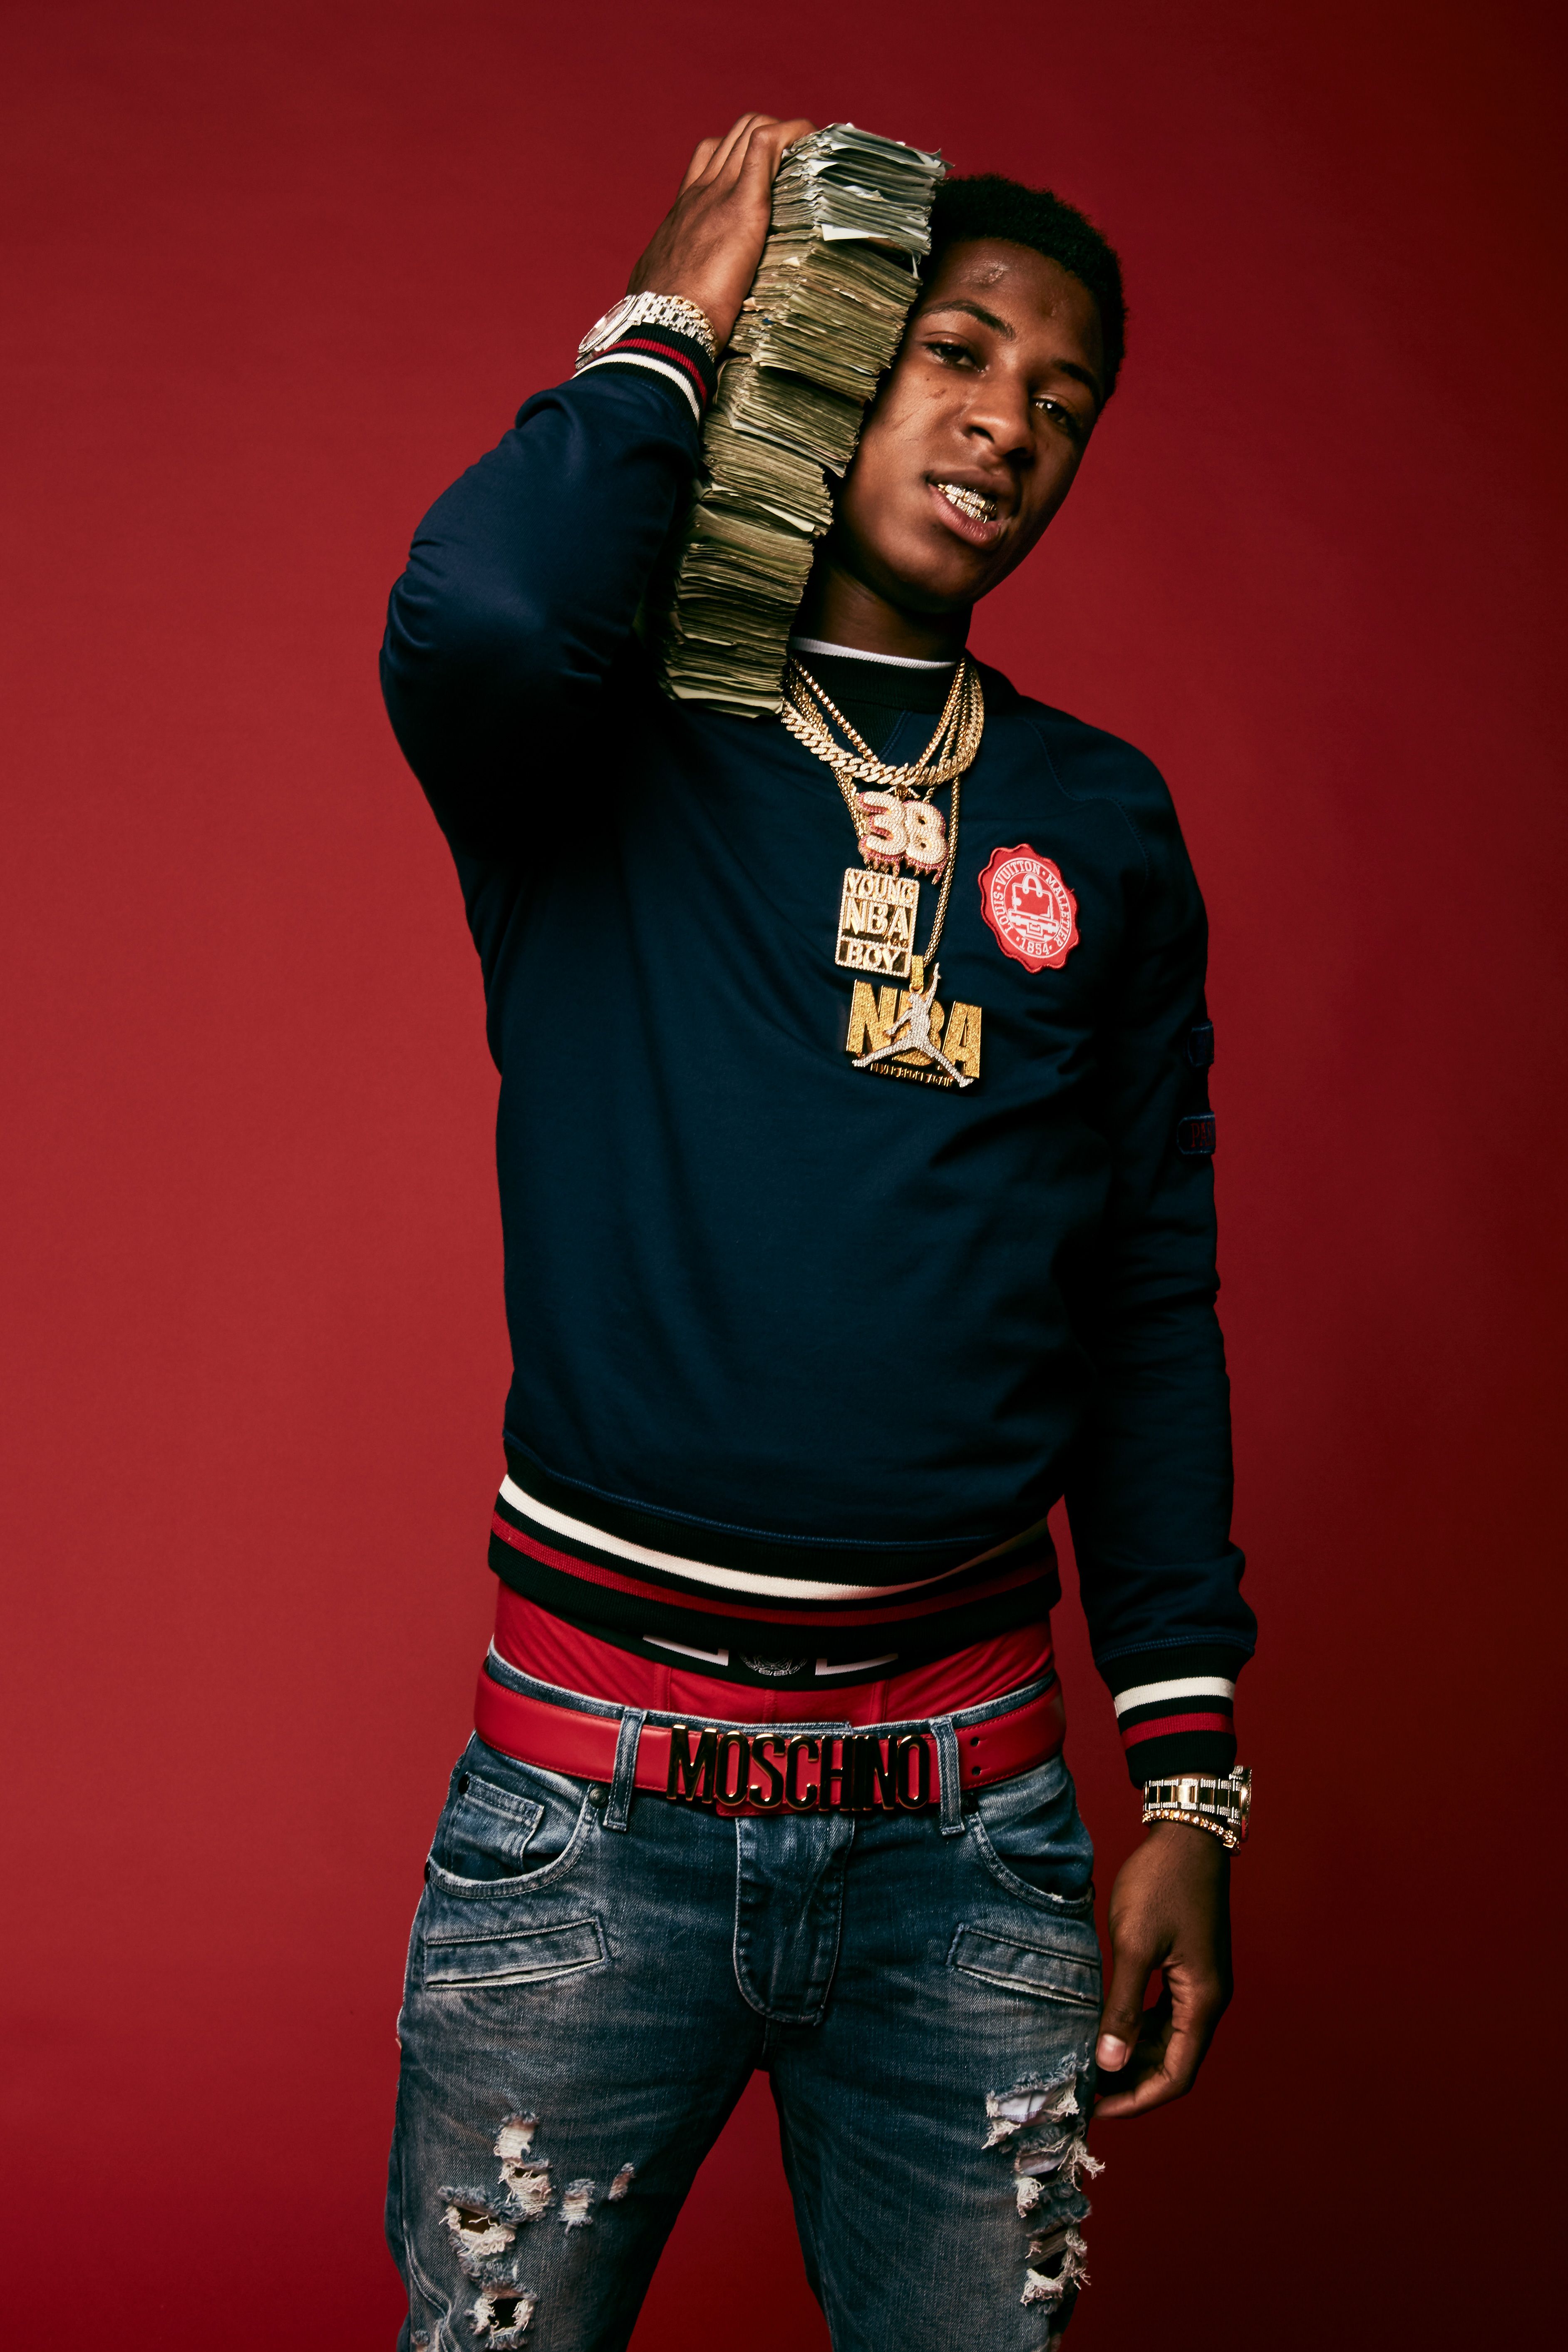 73+ Wallpaper For Nba Youngboy Gratis - Posts.id